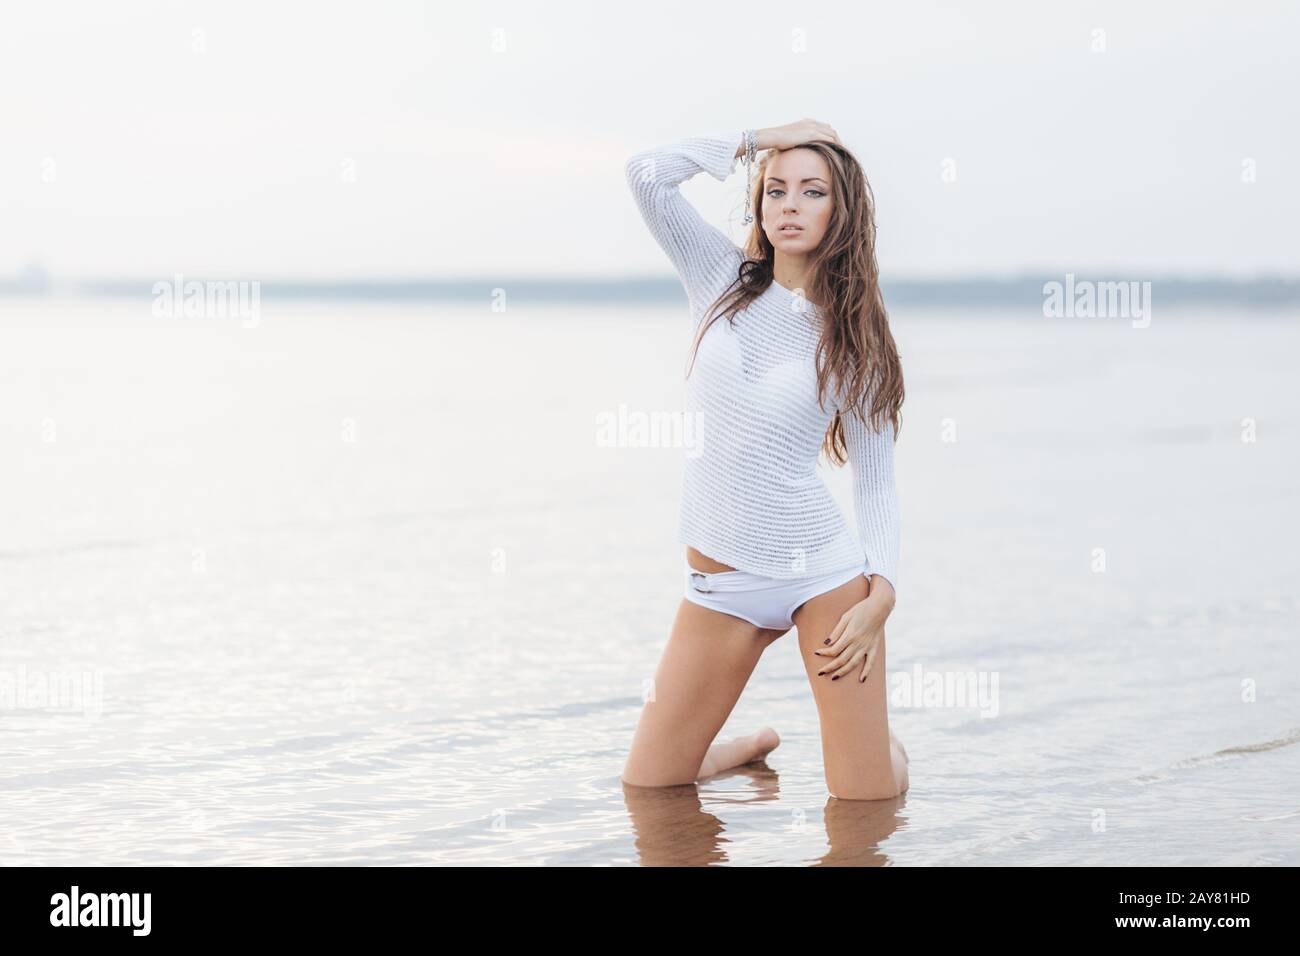 Outdooor view of good looking brunette female with make up, dressed in white bikini, poses at camera near calm sea background, has fit body shape, fee Stock Photo